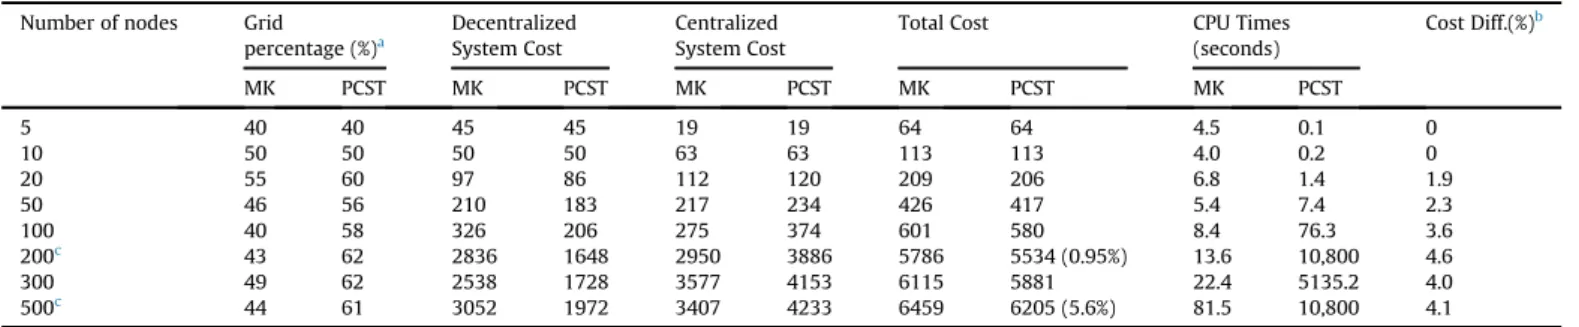 Table 2 shows that the optimal solution of the PCST problem for some instances could not be obtained within our 3 h time limit given our computational environment